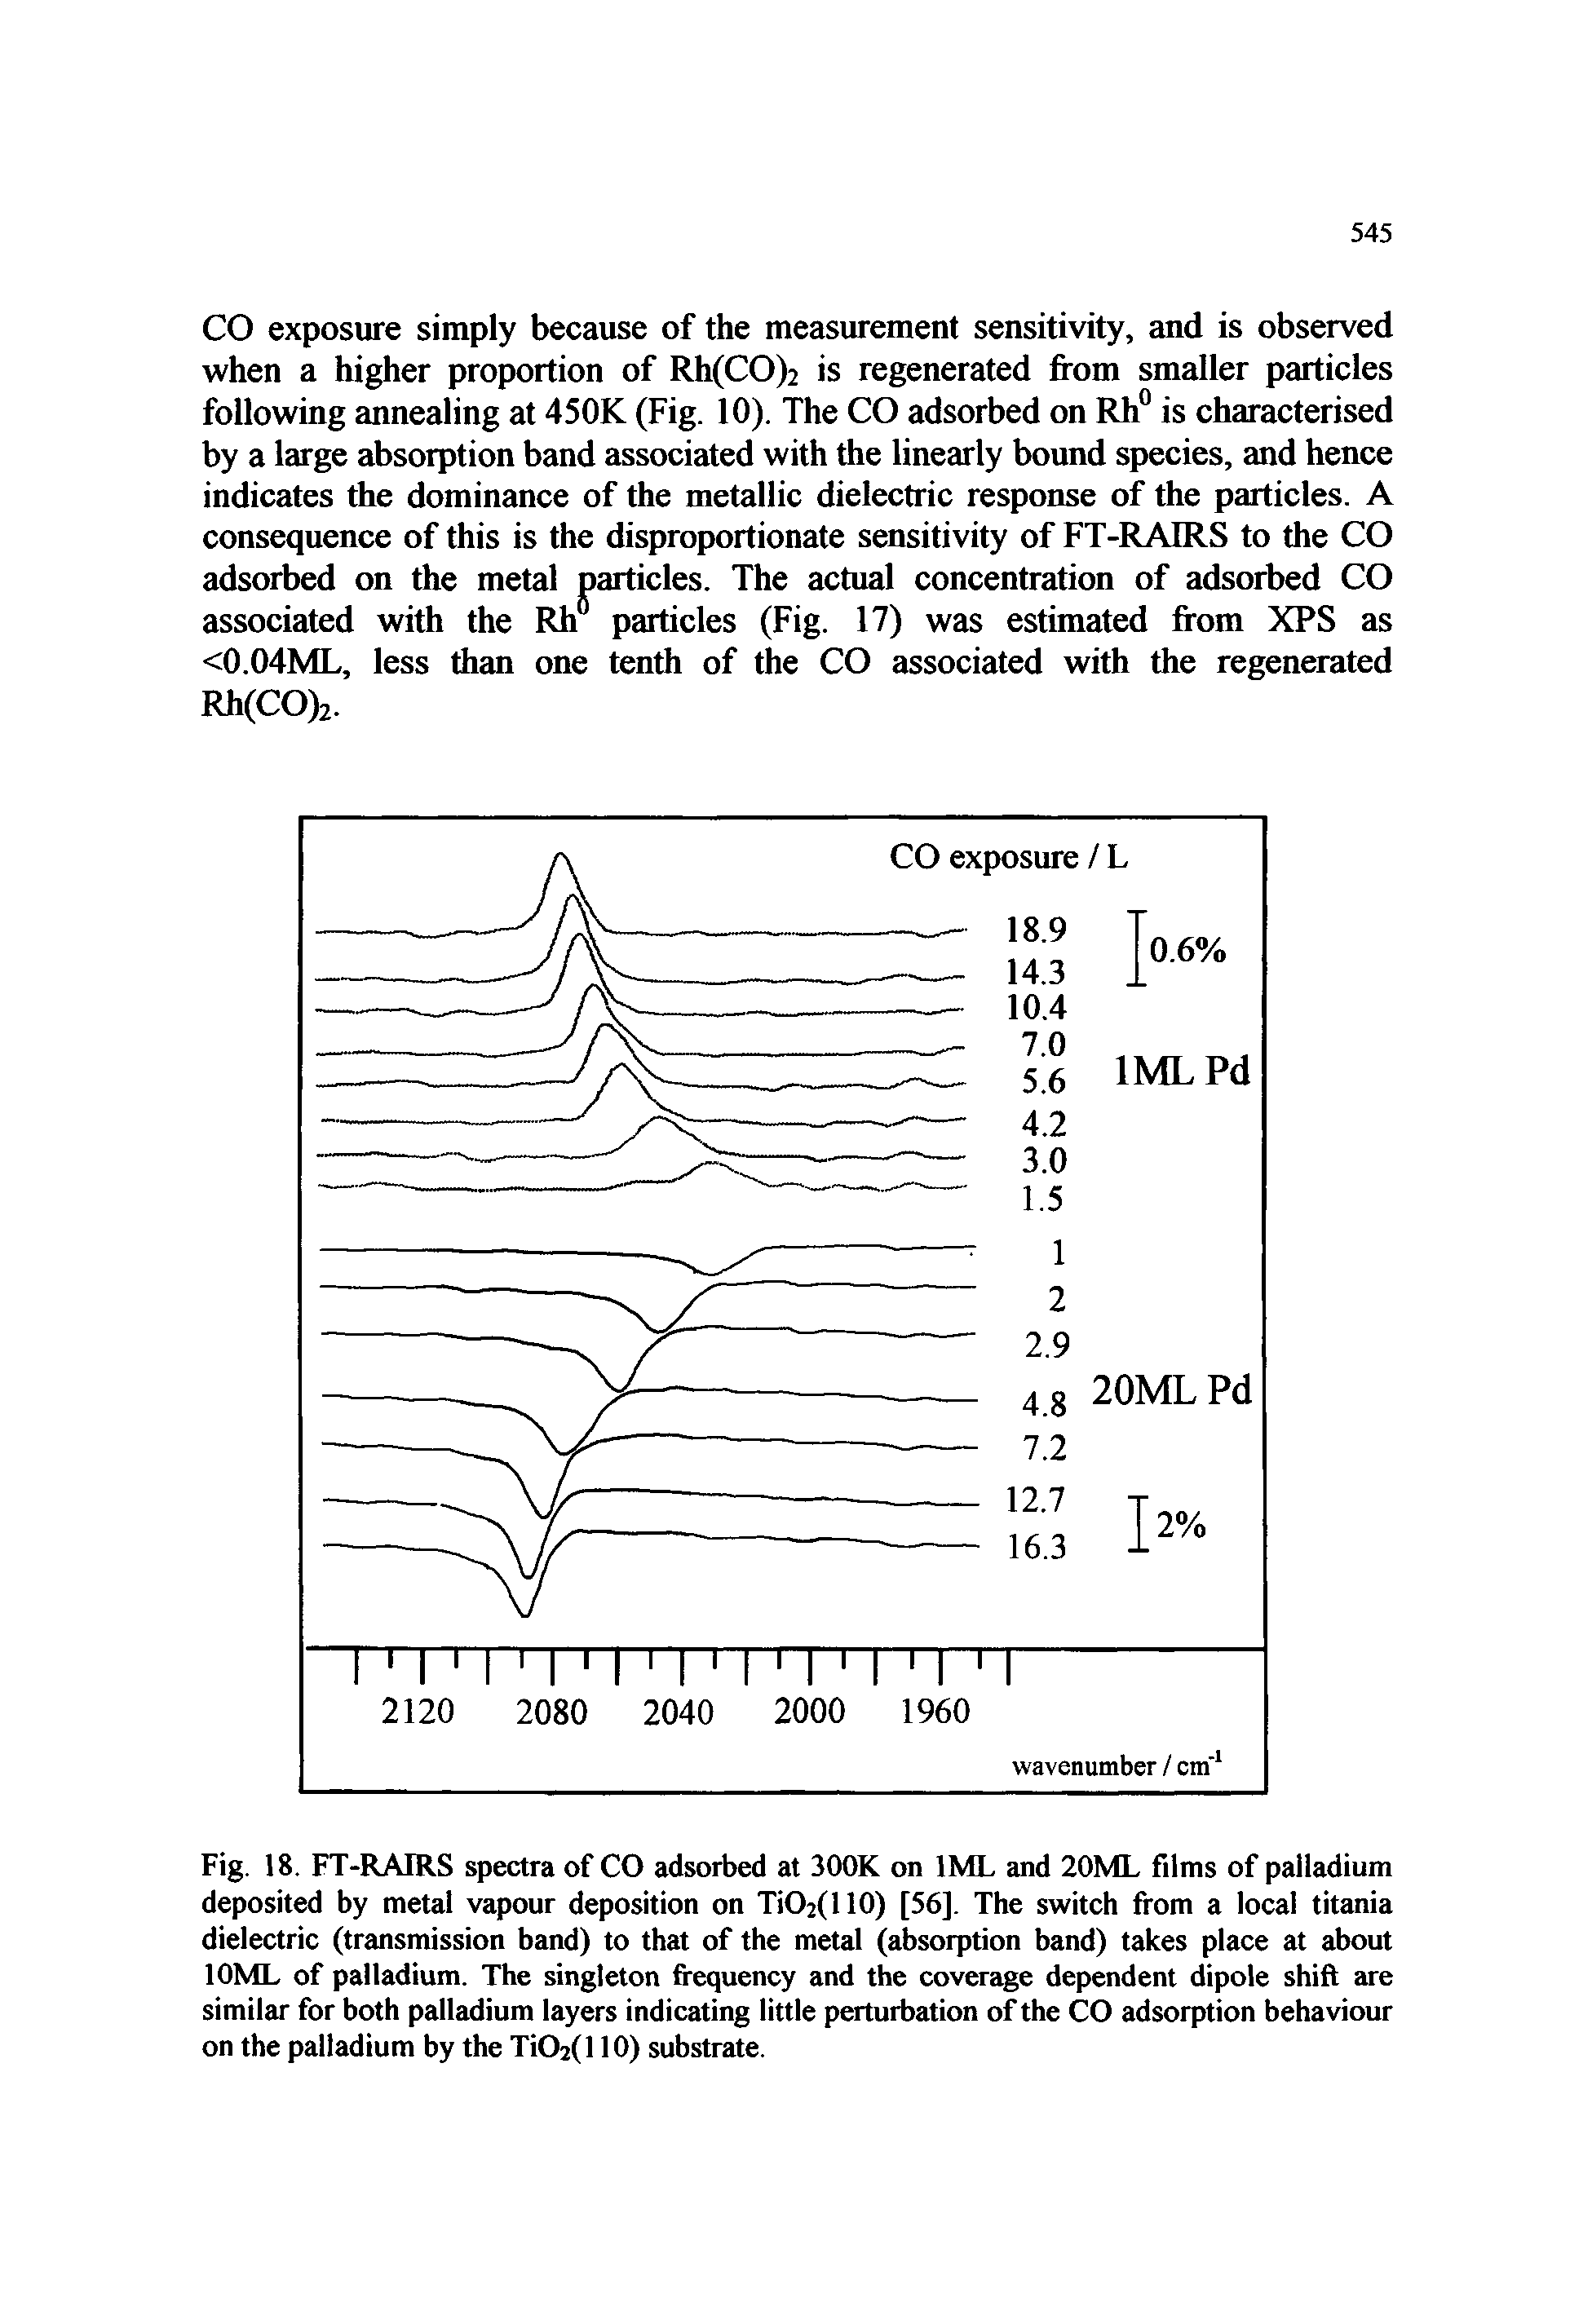 Fig. 18. FT-RAIRS spectra of CO adsorbed at 300K on IML and 20ML films of palladium deposited by metal vapour deposition on TiO2(110) [56]. The switch from a local titania dielectric (transmission band) to that of the metal (absorption band) takes place at about lOML of palladium. The singleton frequency and the coverage dependent dipole shift are similar for both palladium layers indicating little perturbation of the CO adsorption behaviour on the palladium by the Ti02(l 10) substrate.